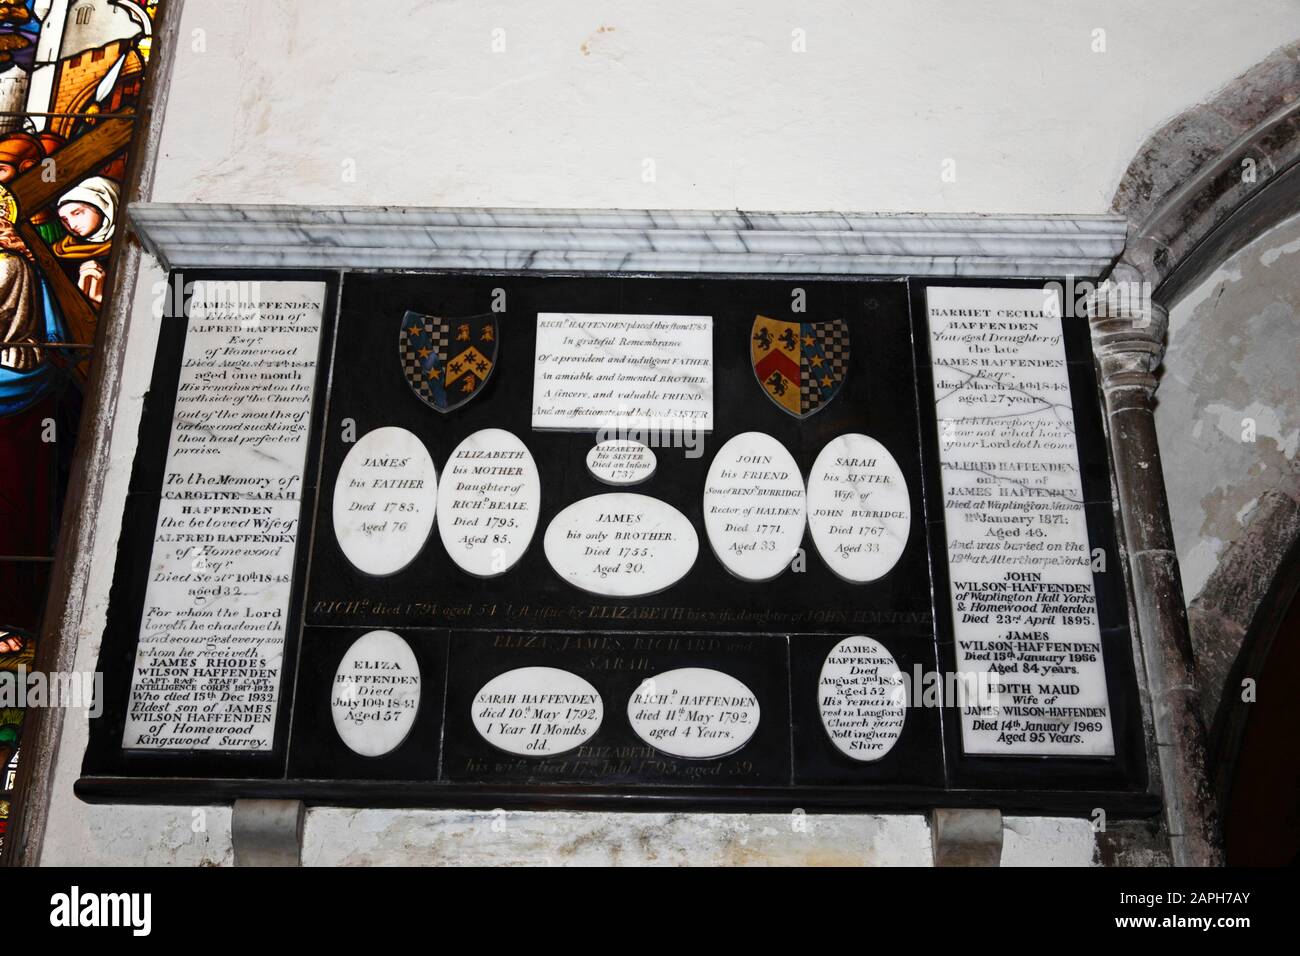 Tombs and memorials to Haffenden family on wall inside St Mildreds church , Tenterden , Kent , England Stock Photo